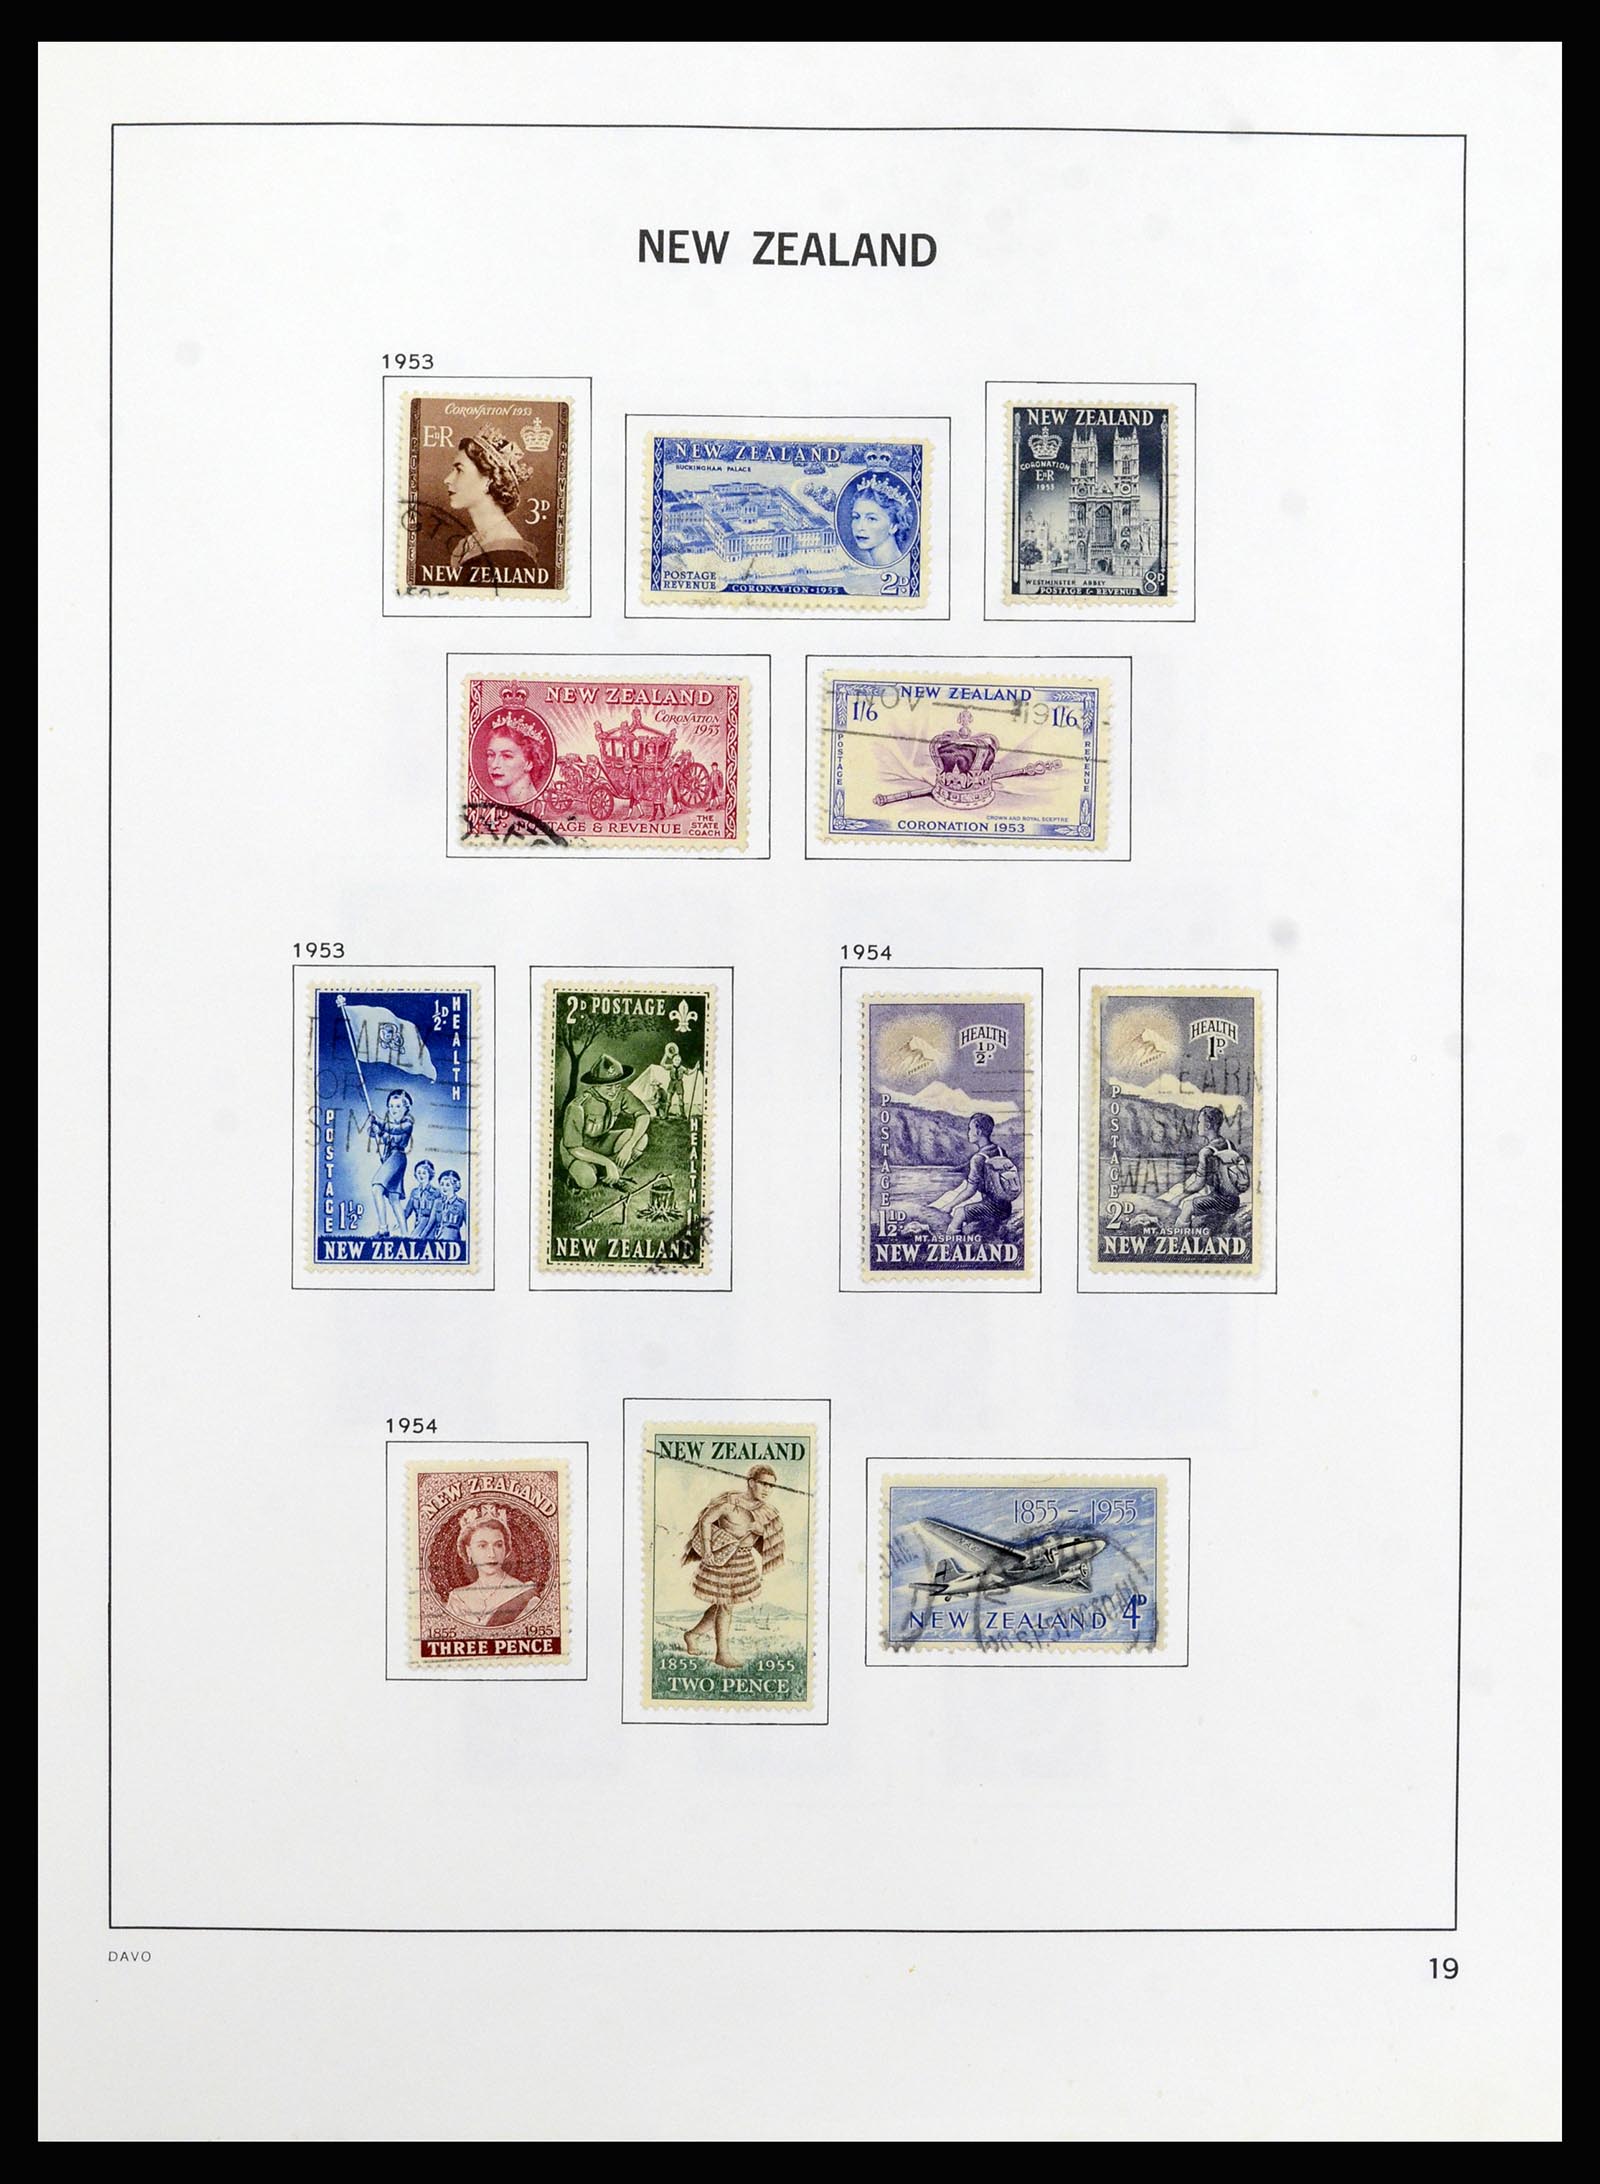 37209 020 - Stamp collection 37209 New Zealand 1855-1997.